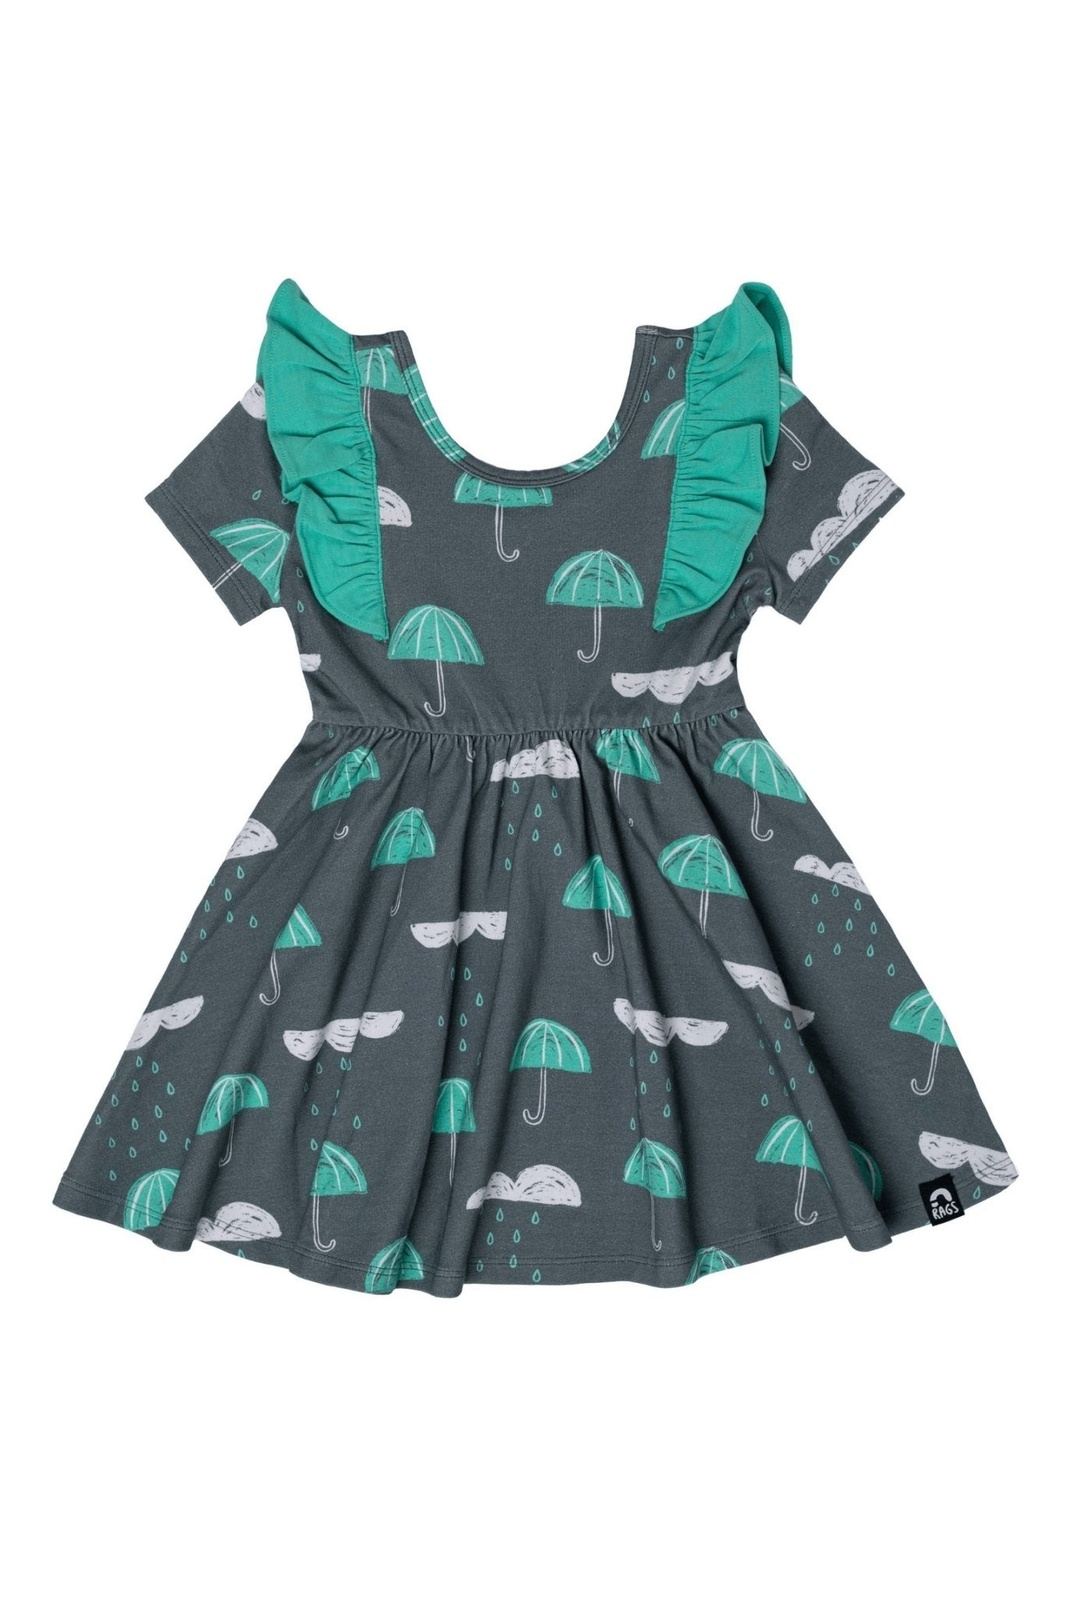 Short Sleeve Ruffle Swing Dress - 'Rainy Day' - Stormy Weather - Tea for Three: A Children's Boutique-New Arrivals-Tea for Three: A Children's Boutique